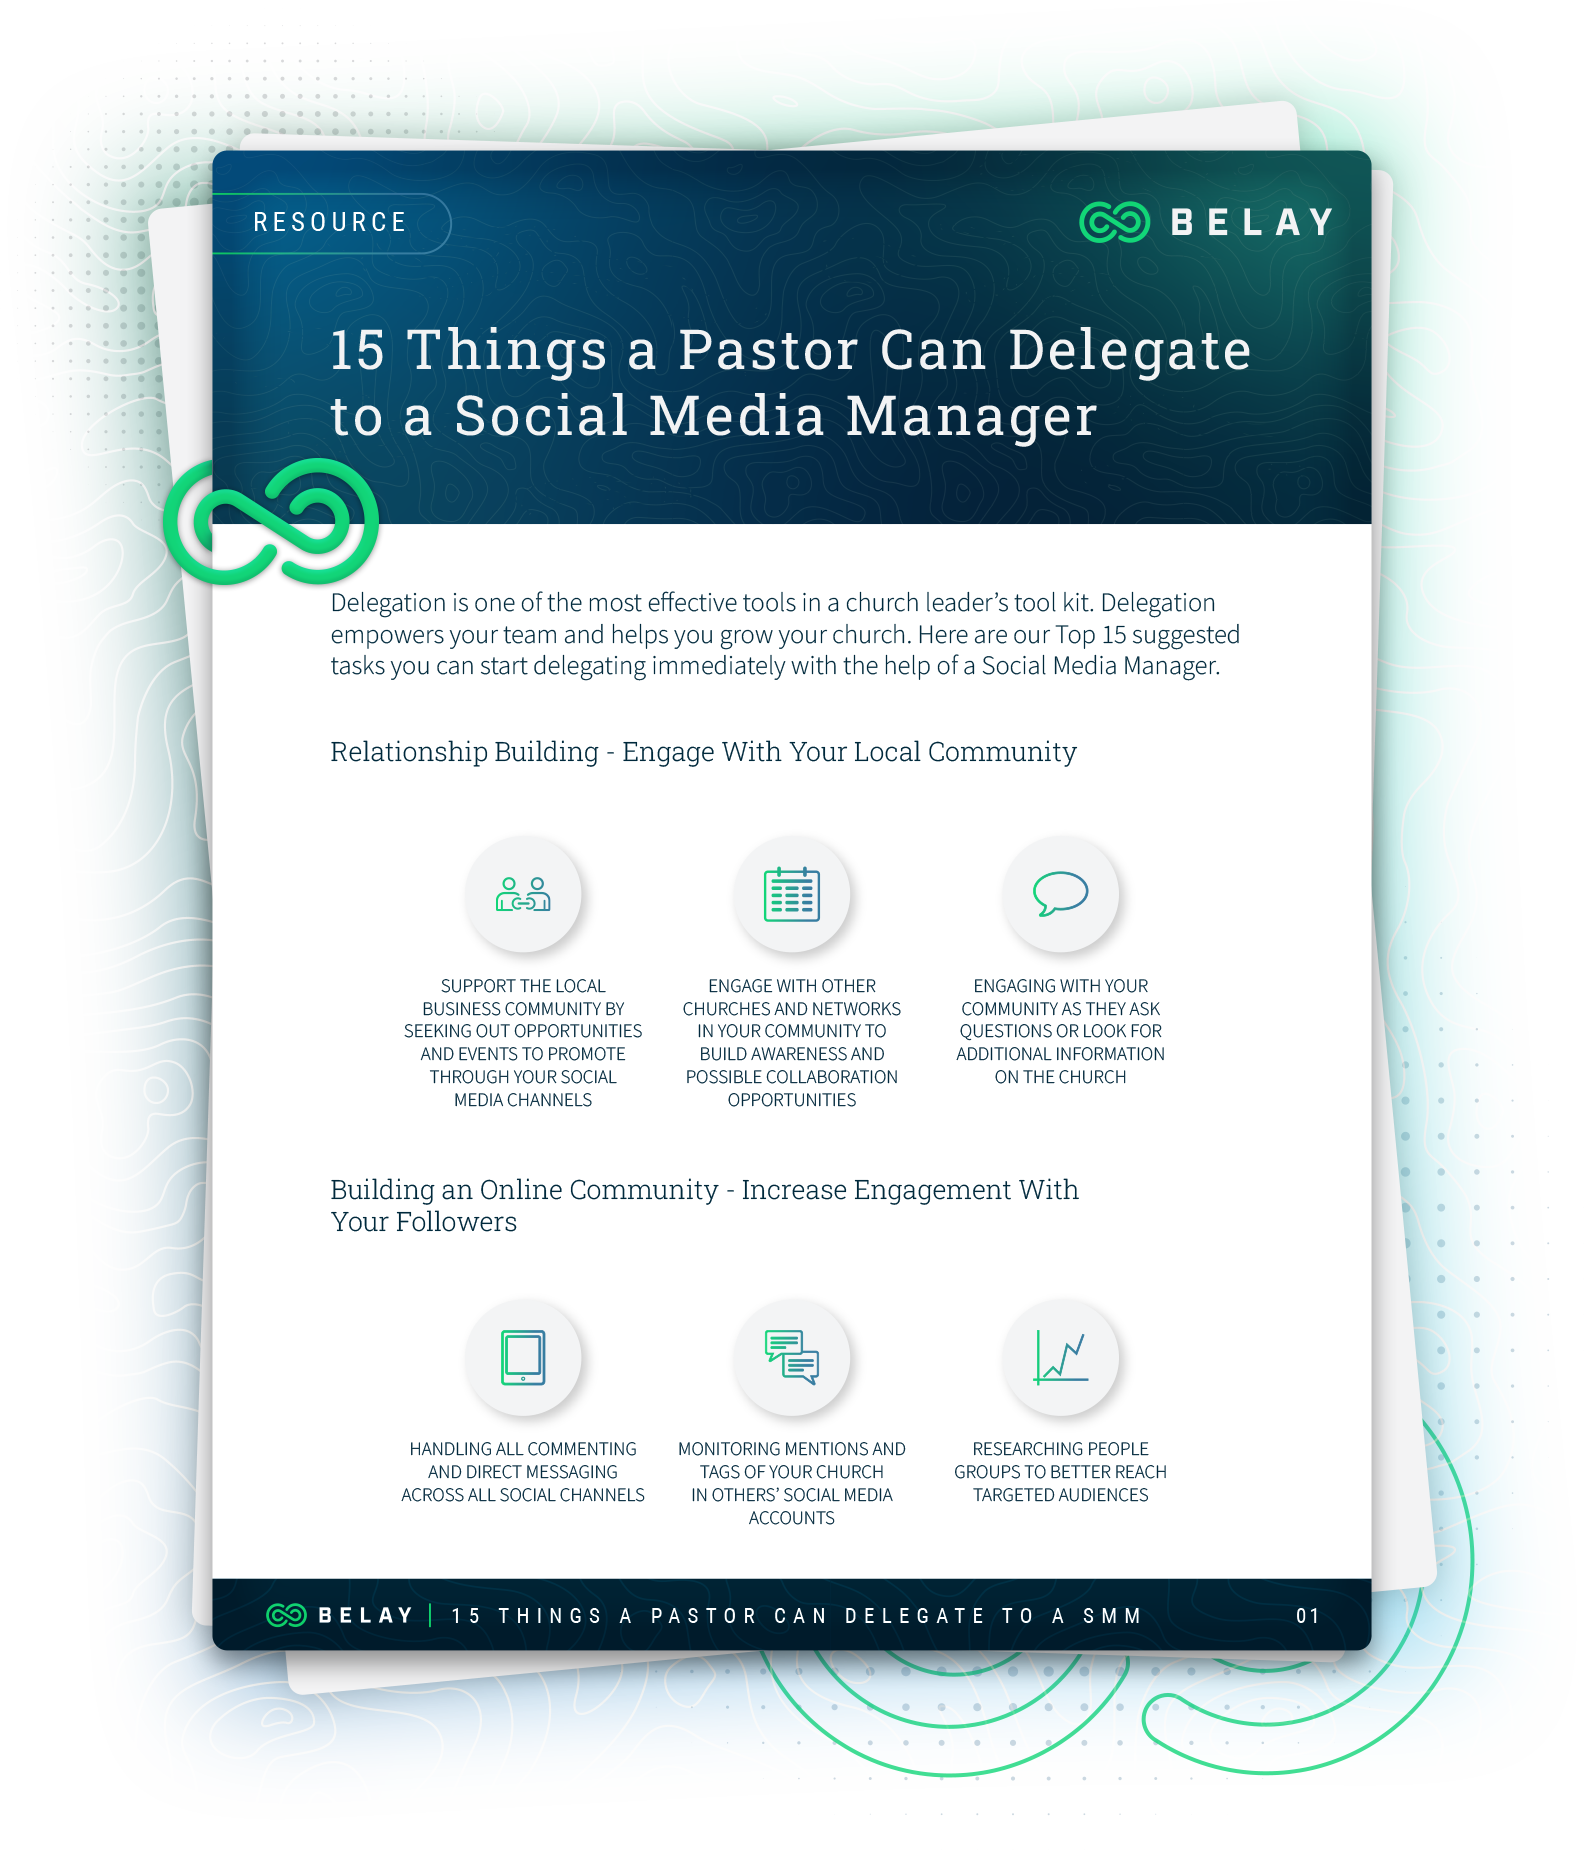 15 Things a Pastor Can Delegate to a Social Media Manager